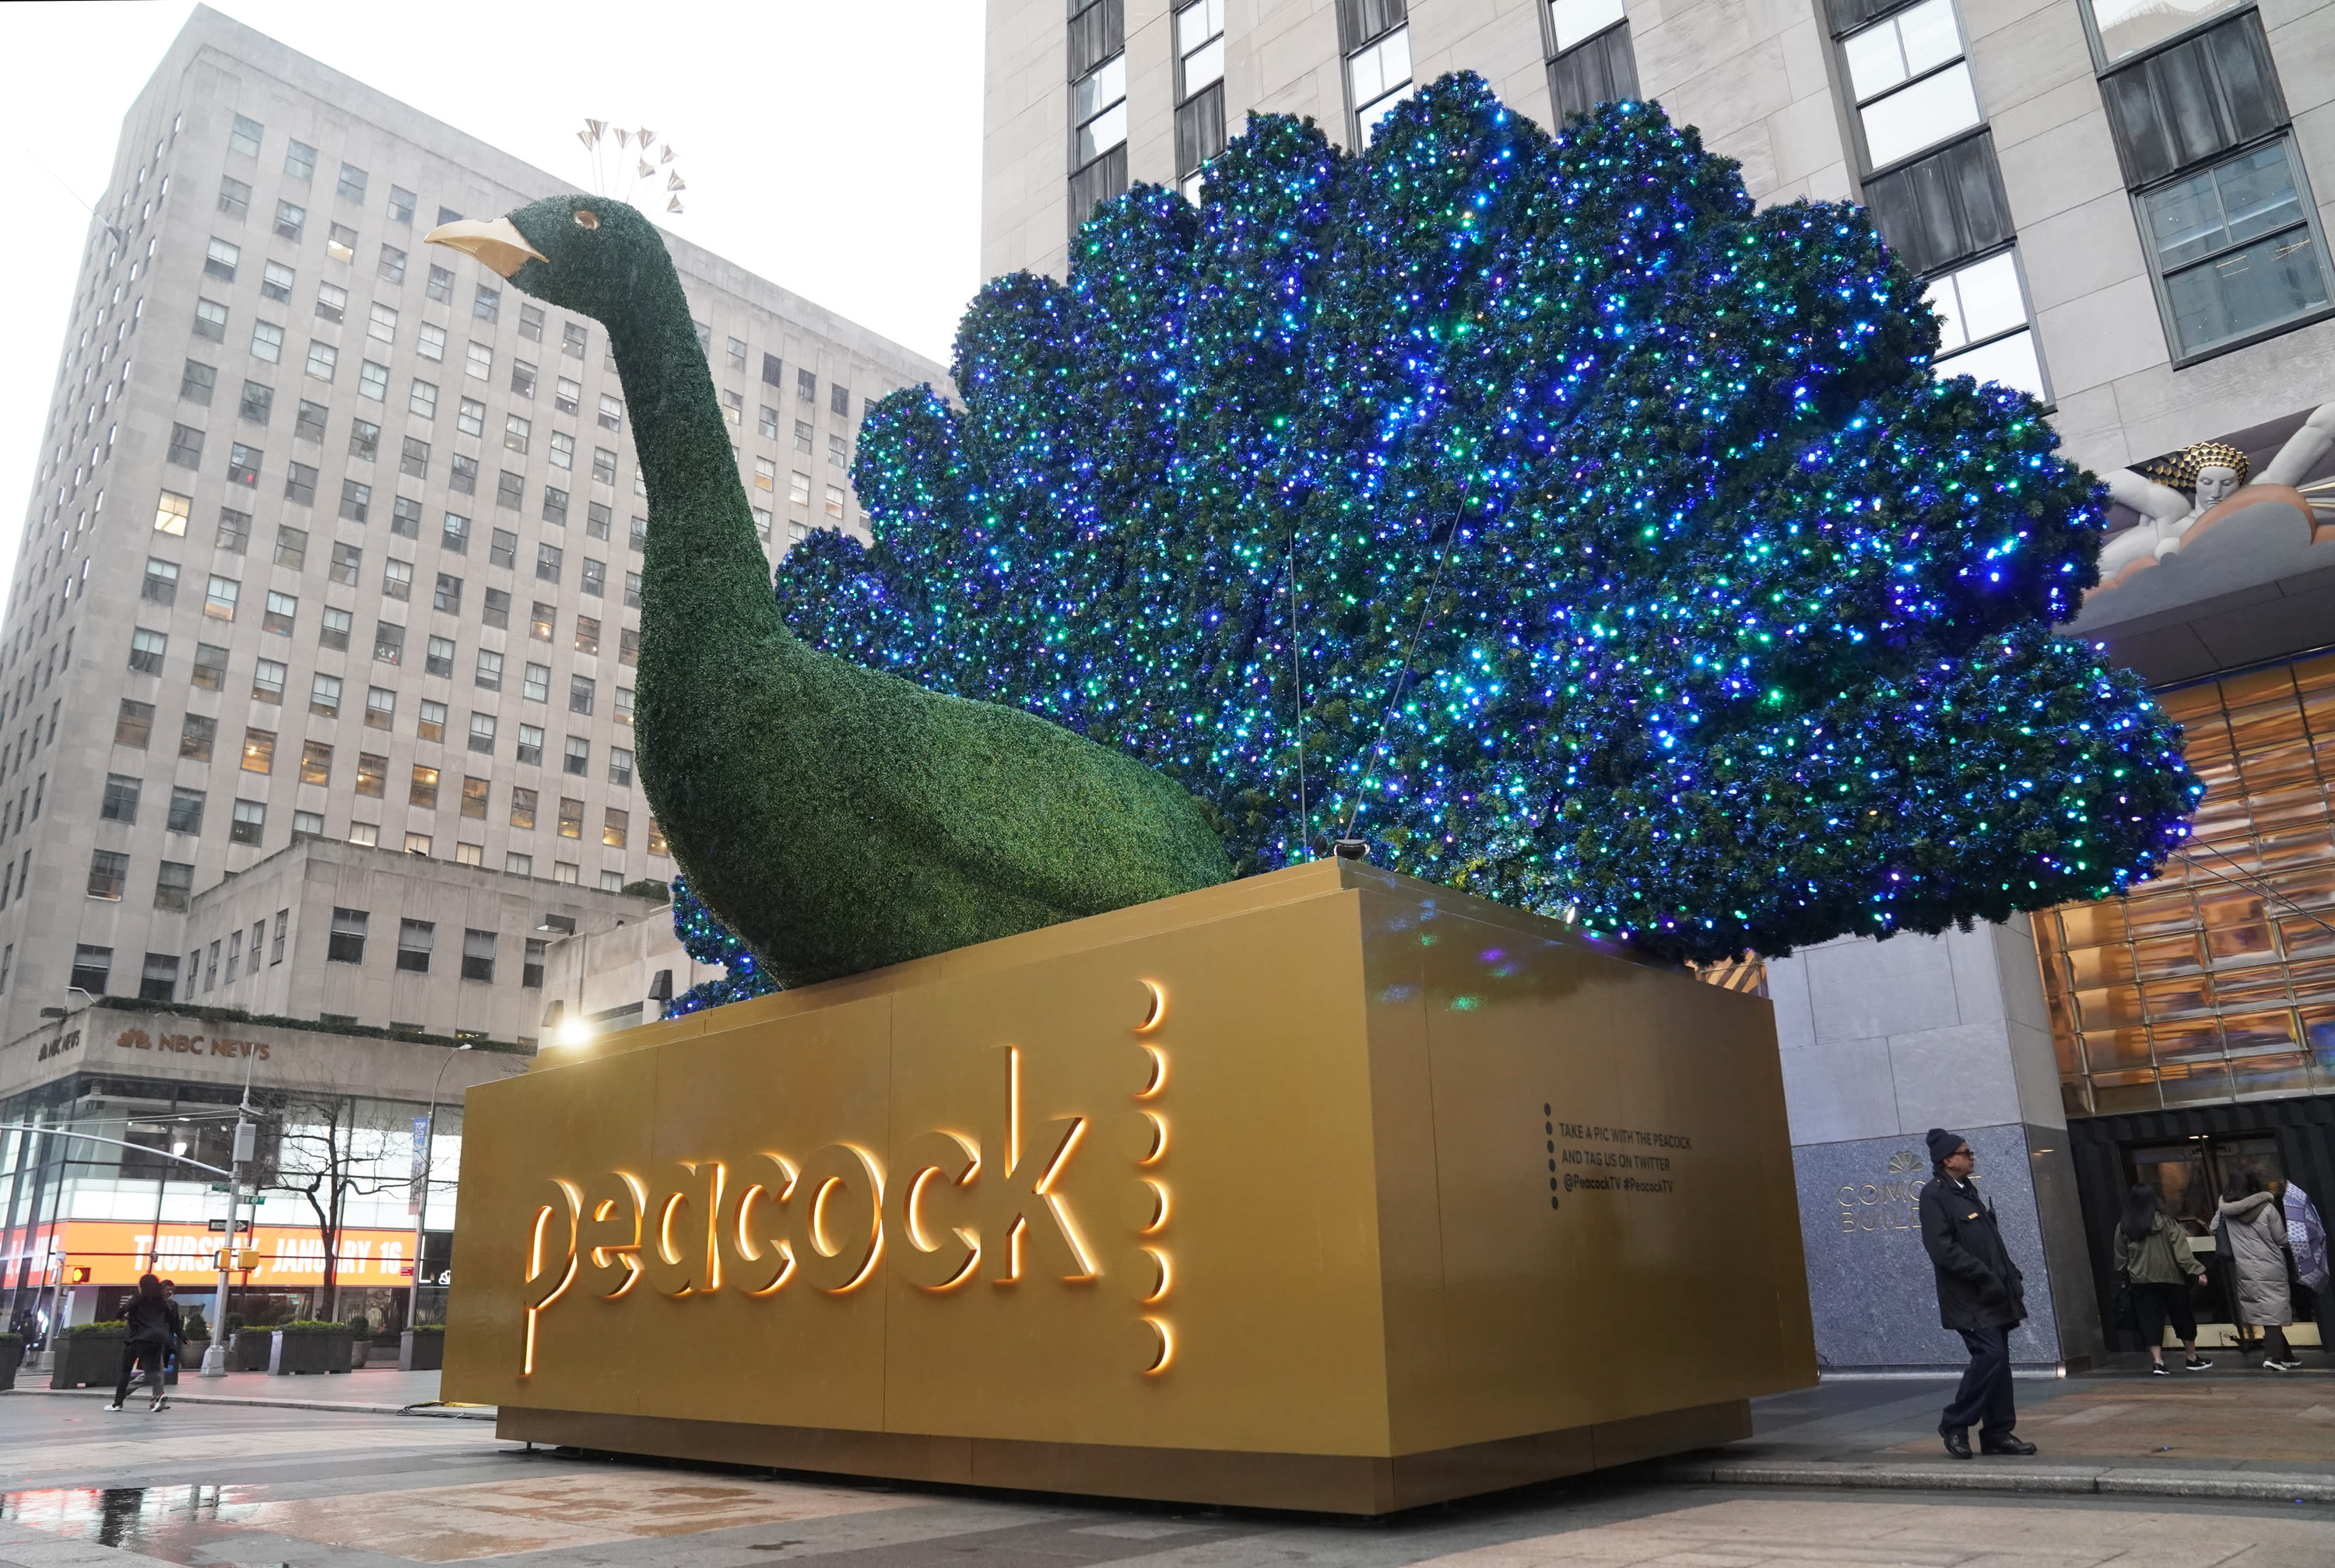 Peacock Raising Prices By $2 A Month This Summer, Its Second Hike In Two Years